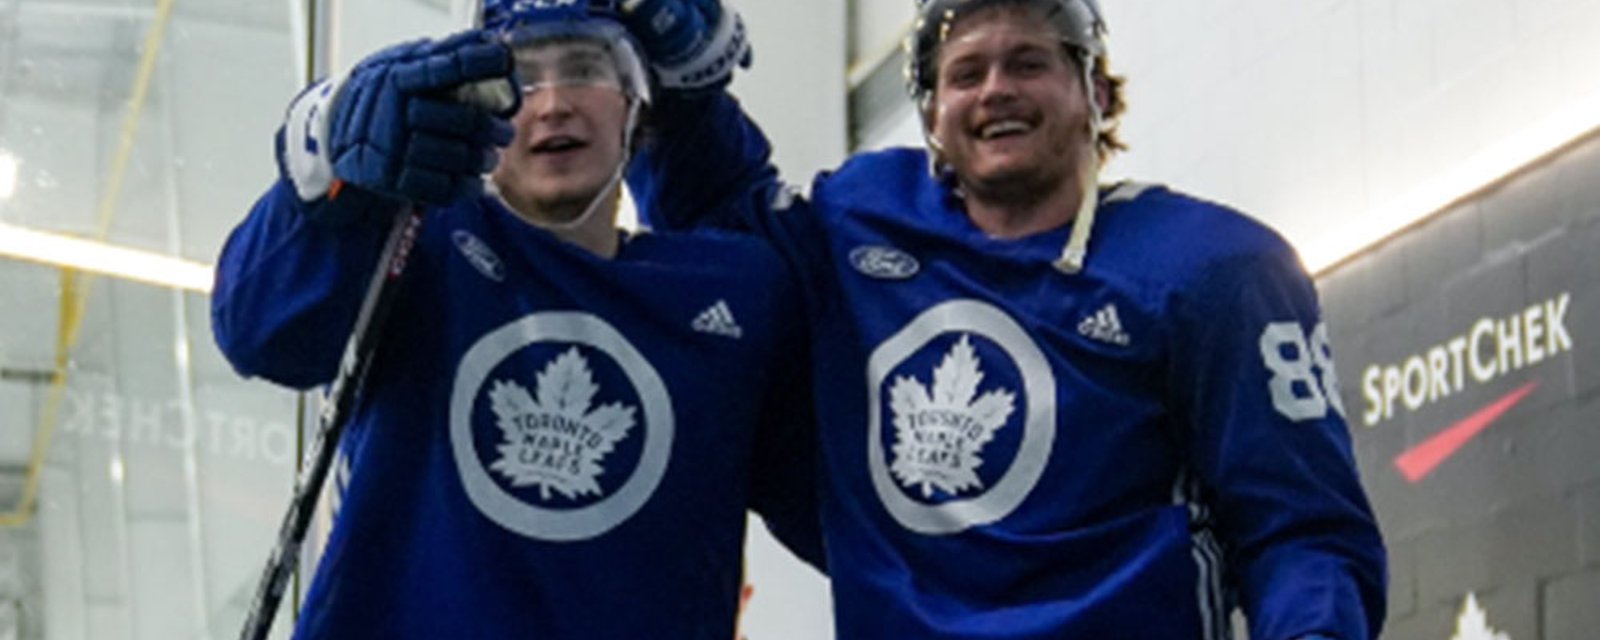 Nylander celebrates new contract with his teammates